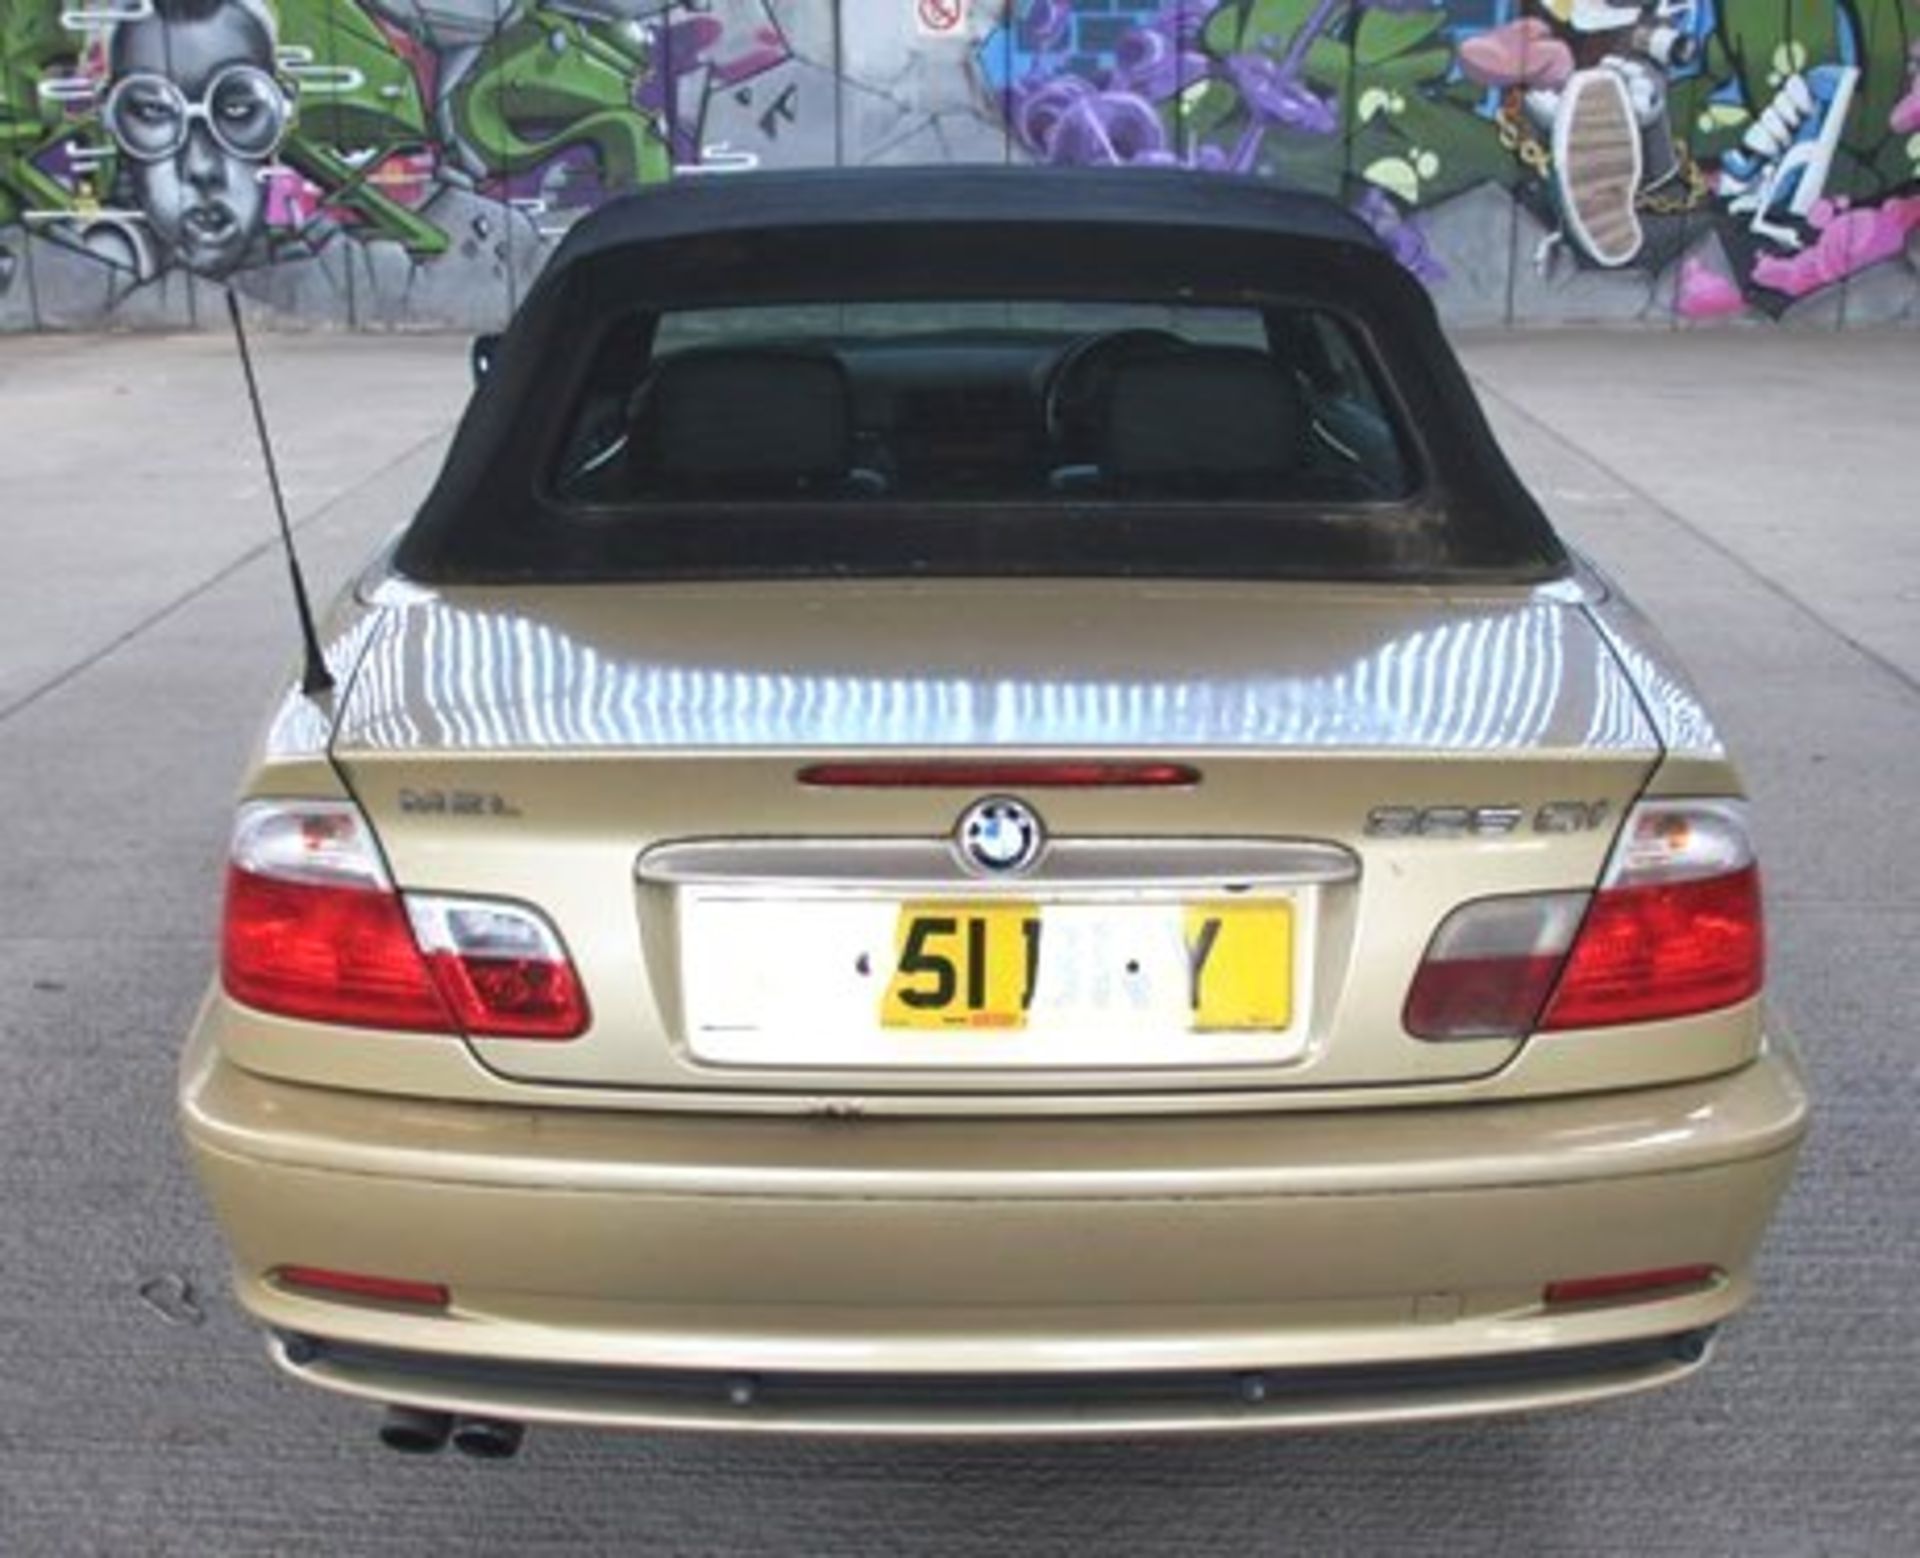 BMW 325CI petrol convertible car, Registration No. CV51 BNY, mileage 104743, 5 speed manual gearbox, - Image 4 of 10